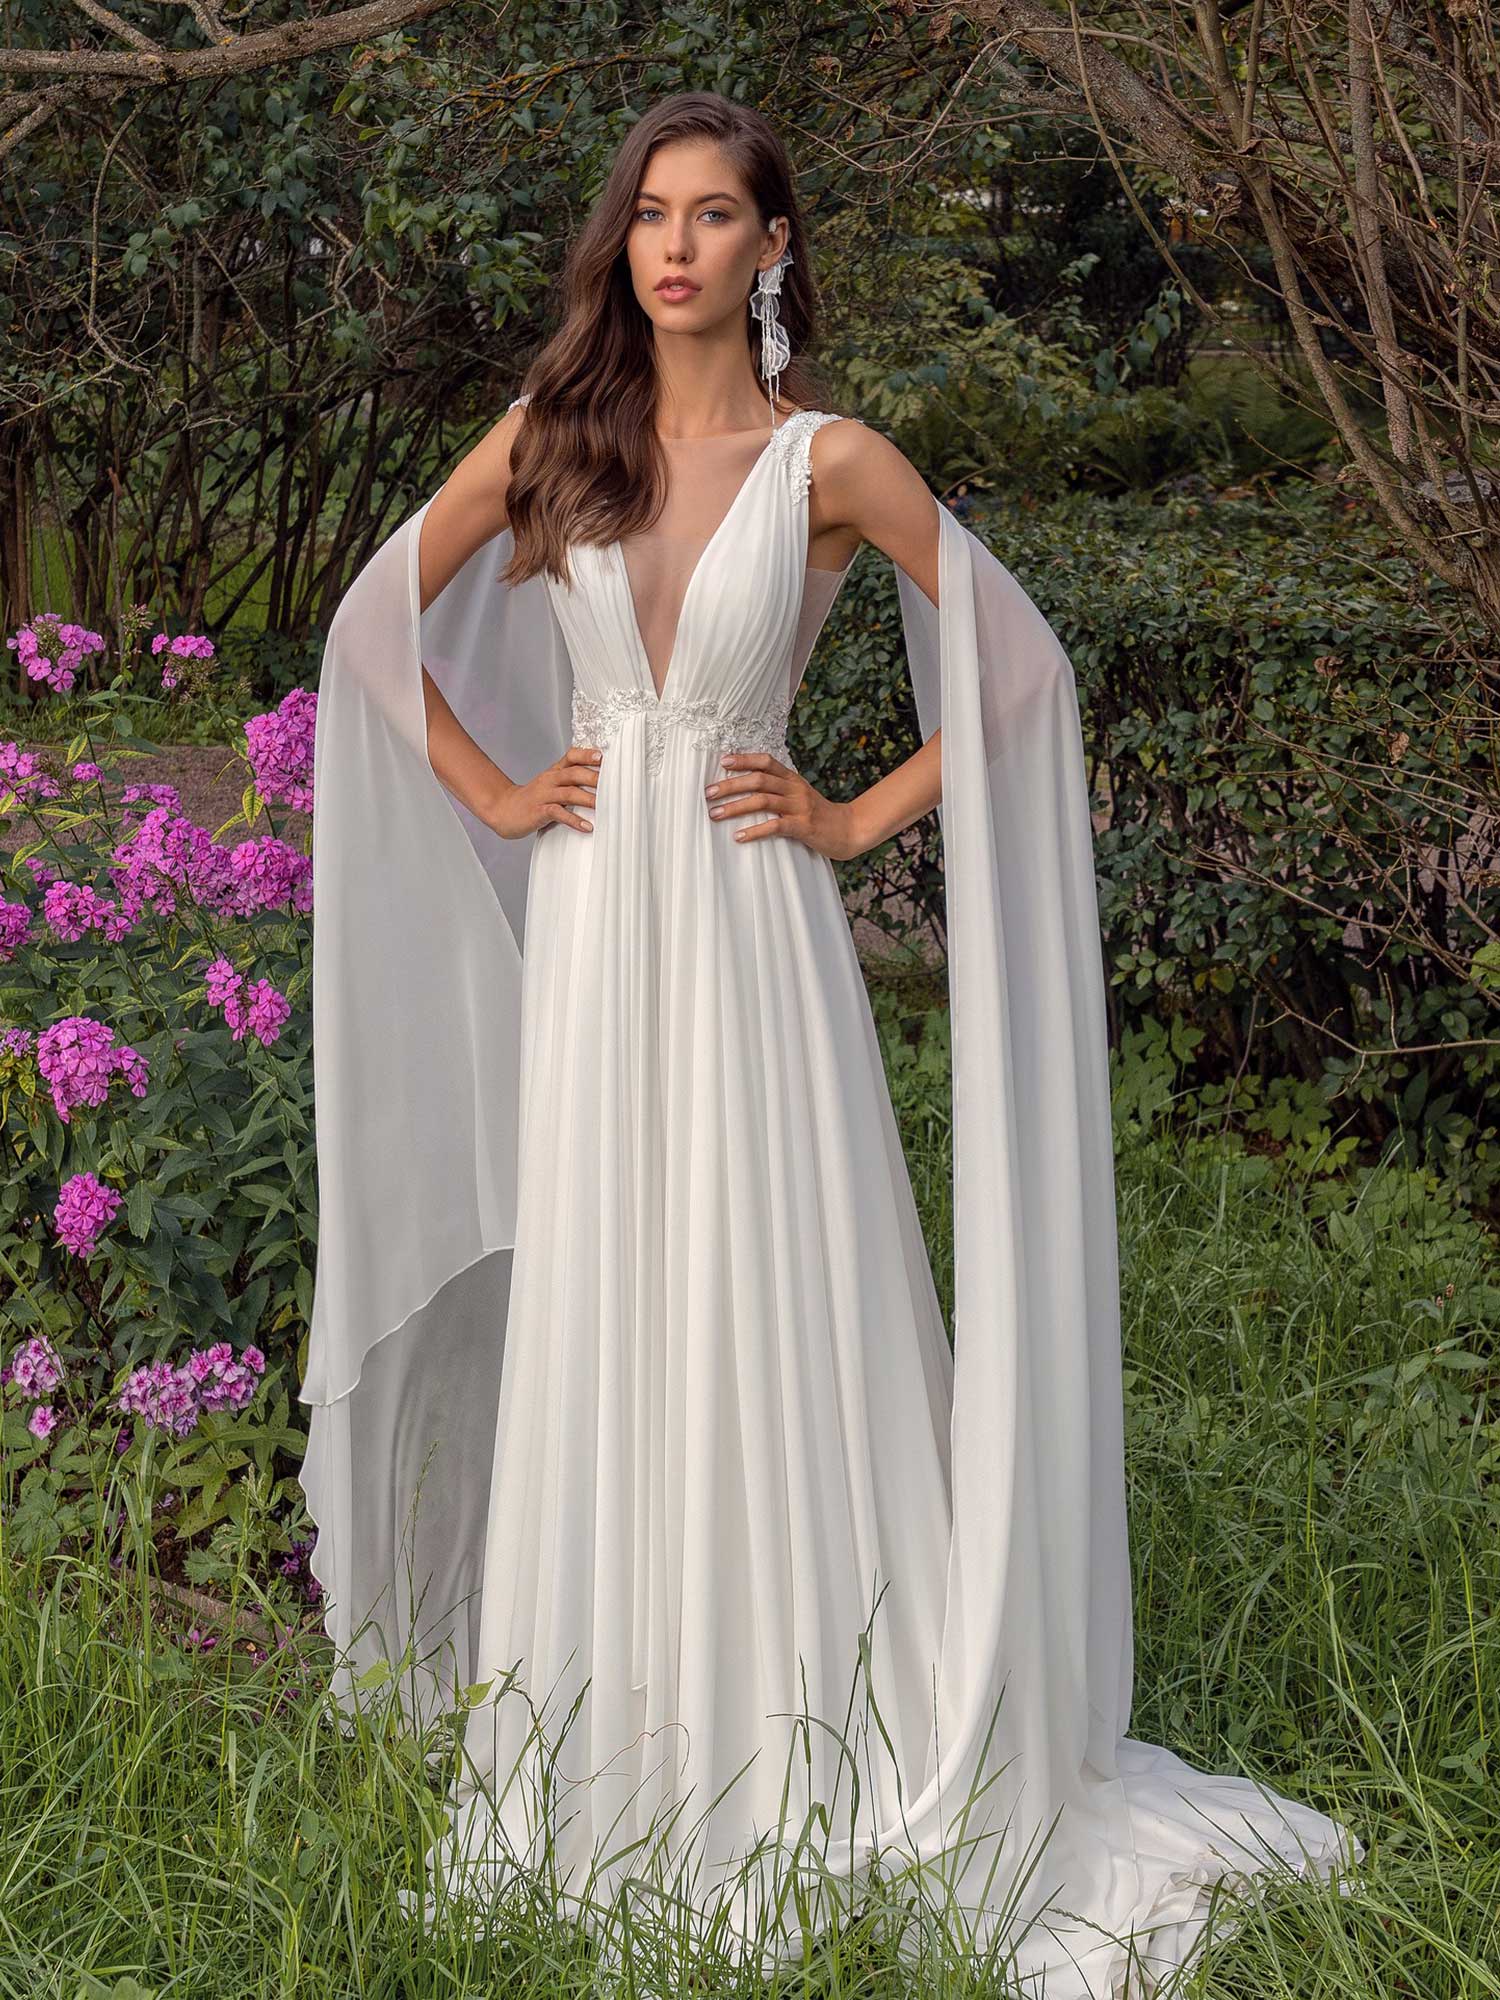  Plunging Neckline Wedding Dress of the decade The ultimate guide 